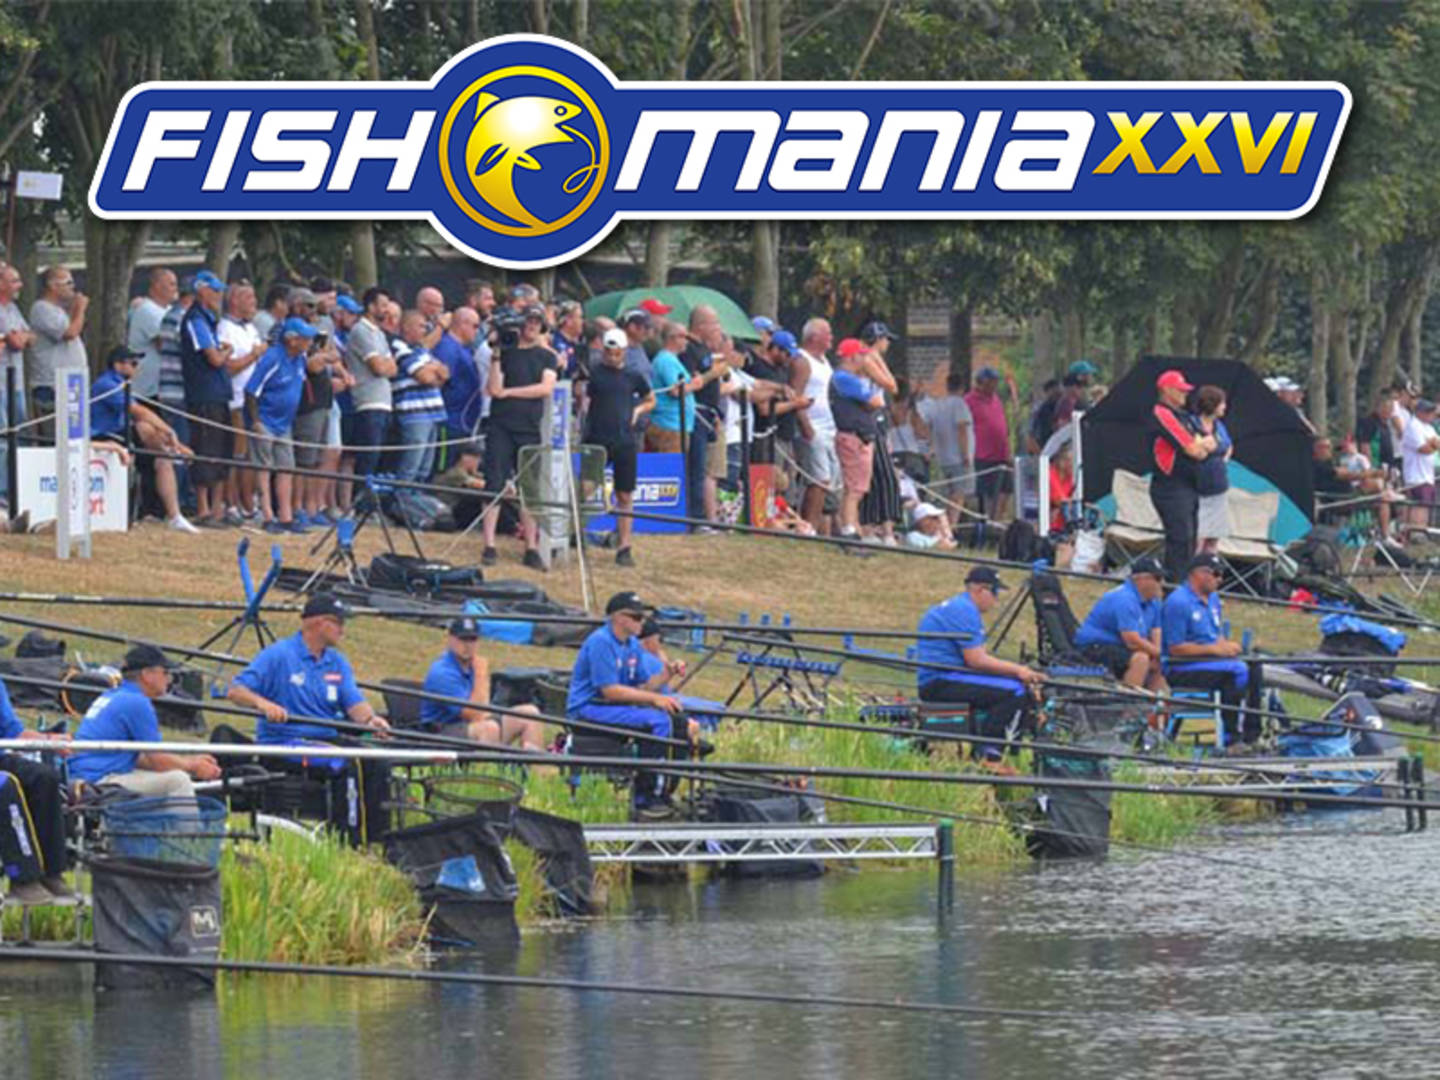 Competitors at Fish'O'Mania competition